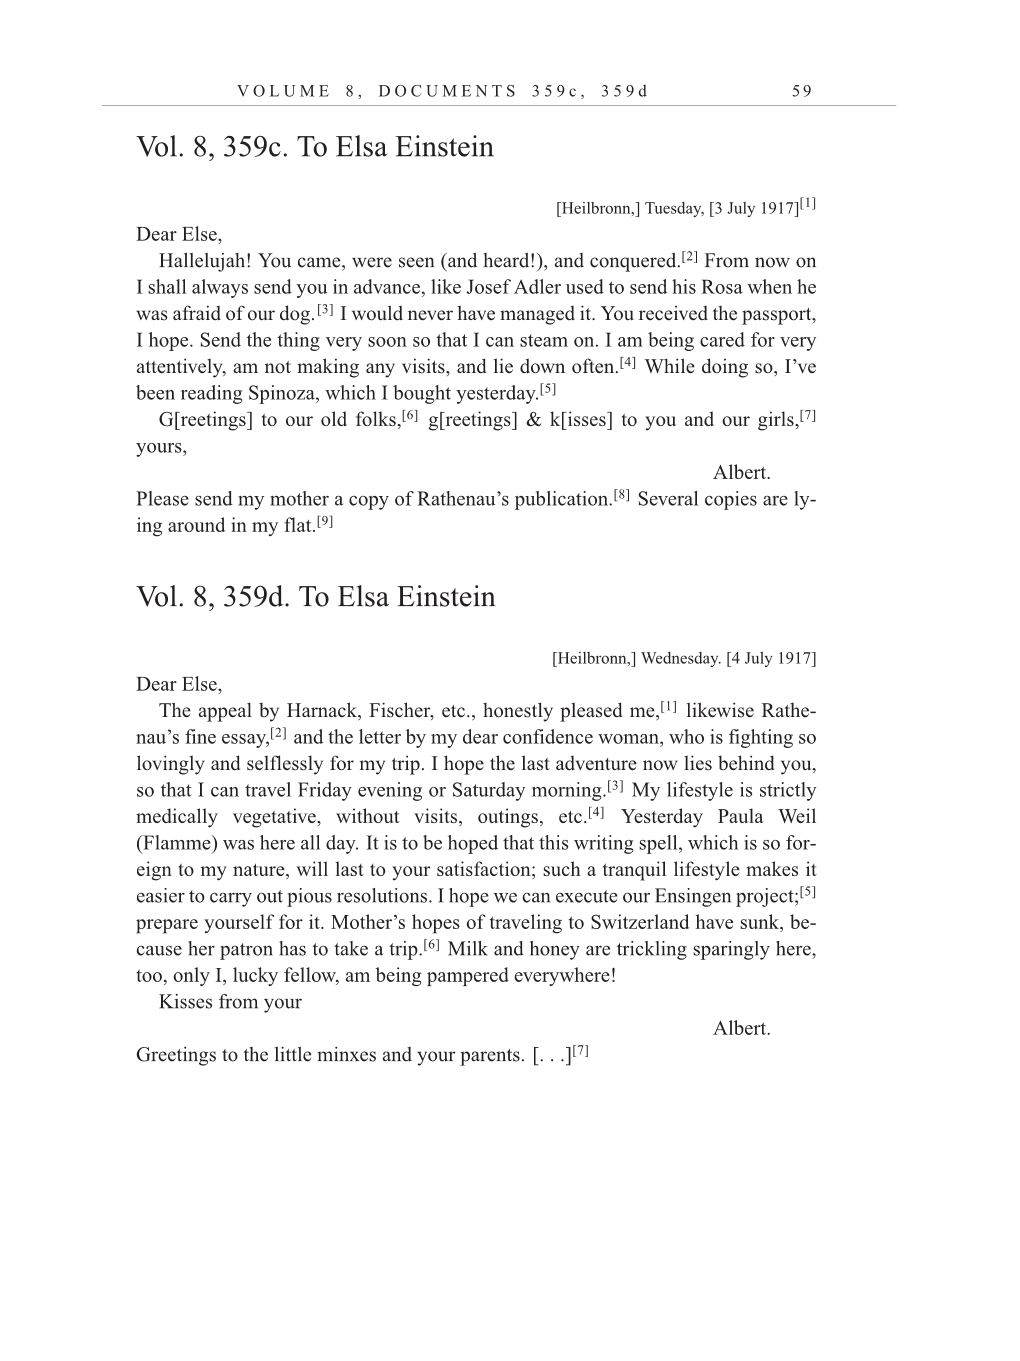 Volume 10: The Berlin Years: Correspondence, May-December 1920, and Supplementary Correspondence, 1909-1920 (English translation supplement) page 59